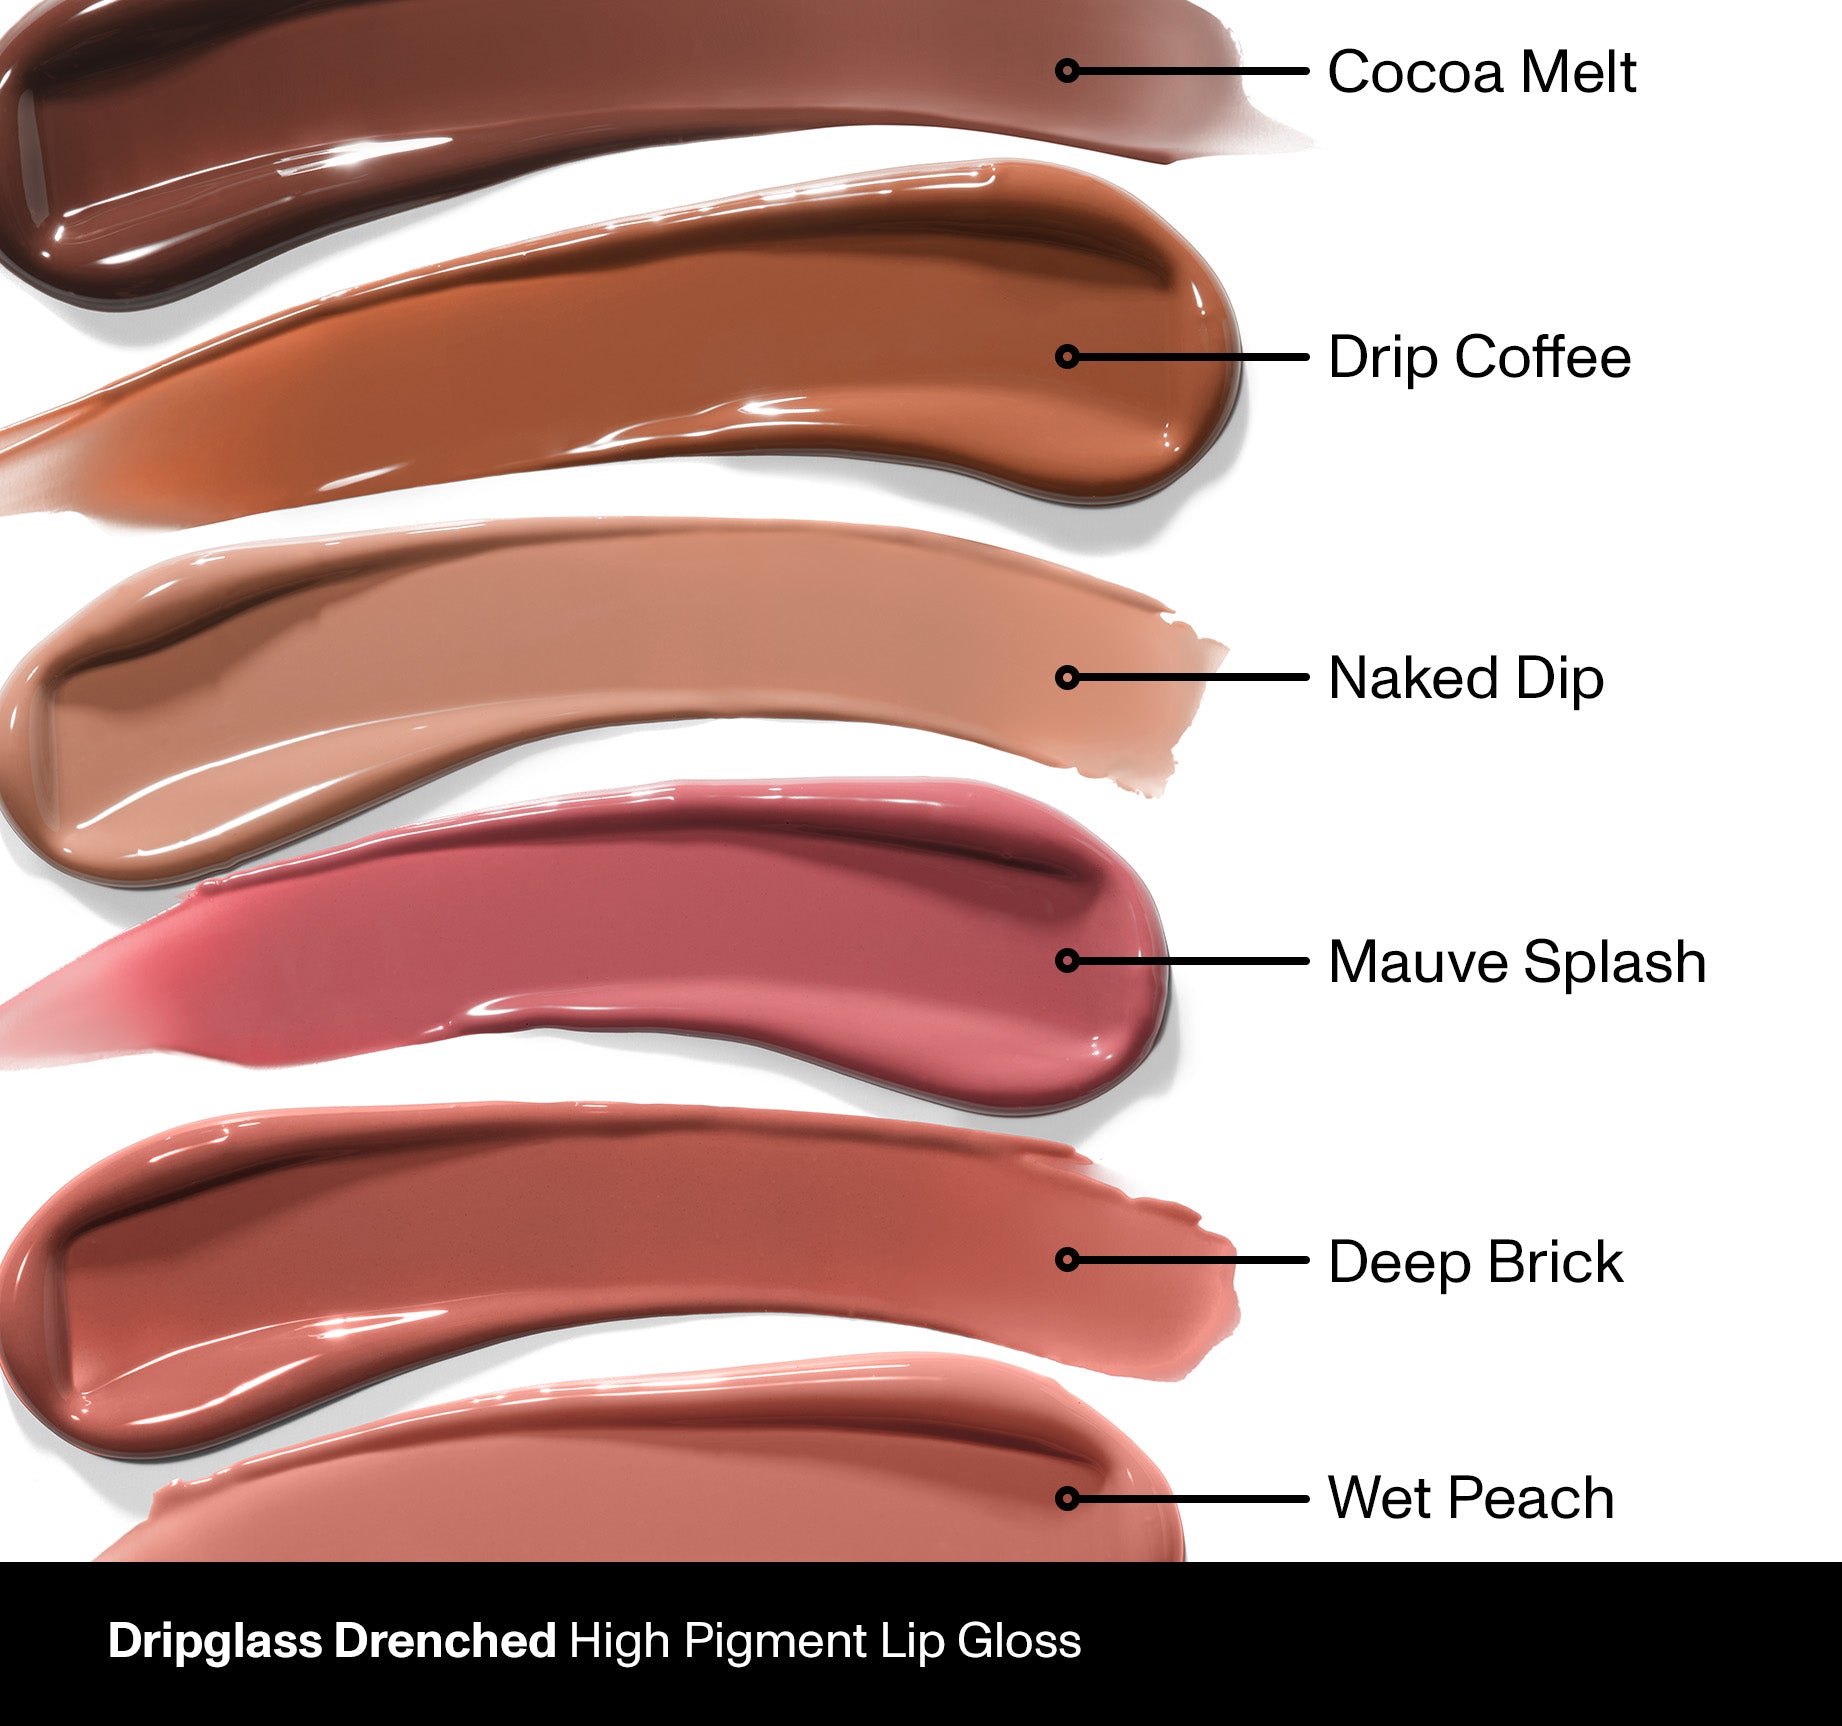 Dripglass Drenched High Pigment Lip Gloss - Deep Brick - Image 4